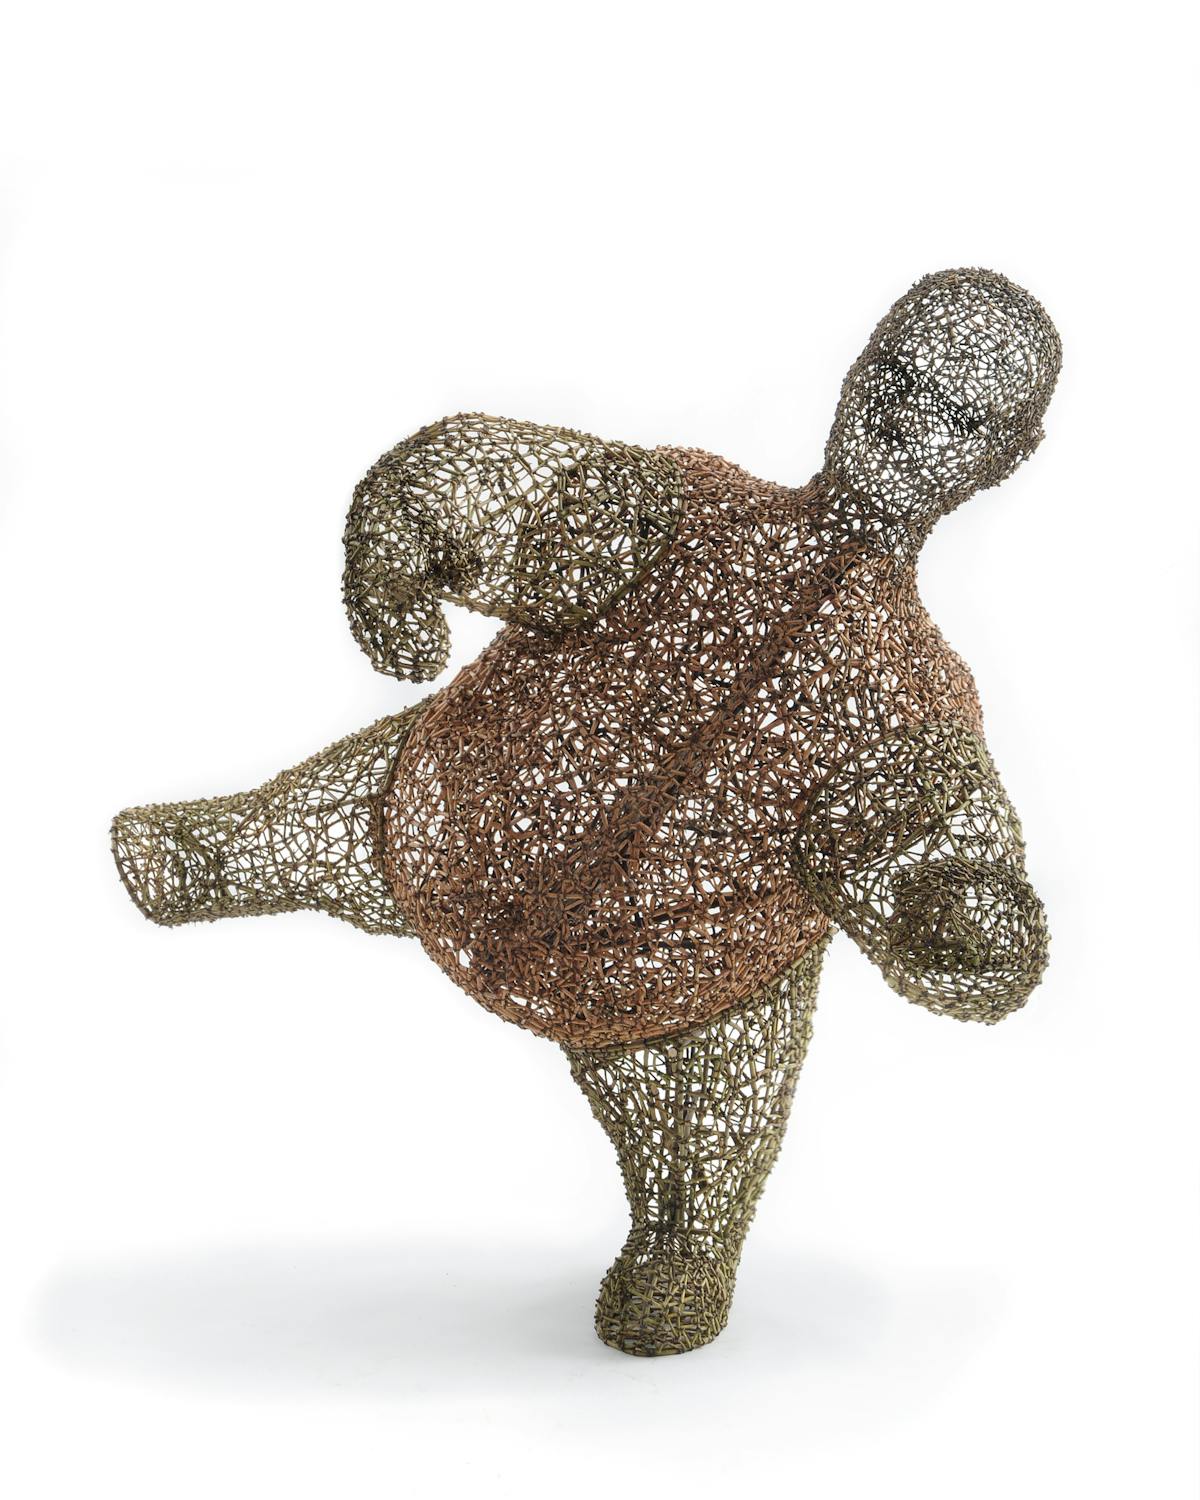 sculpture of a short squat man balancing on one leg made from woven natural material in a basket like fashion